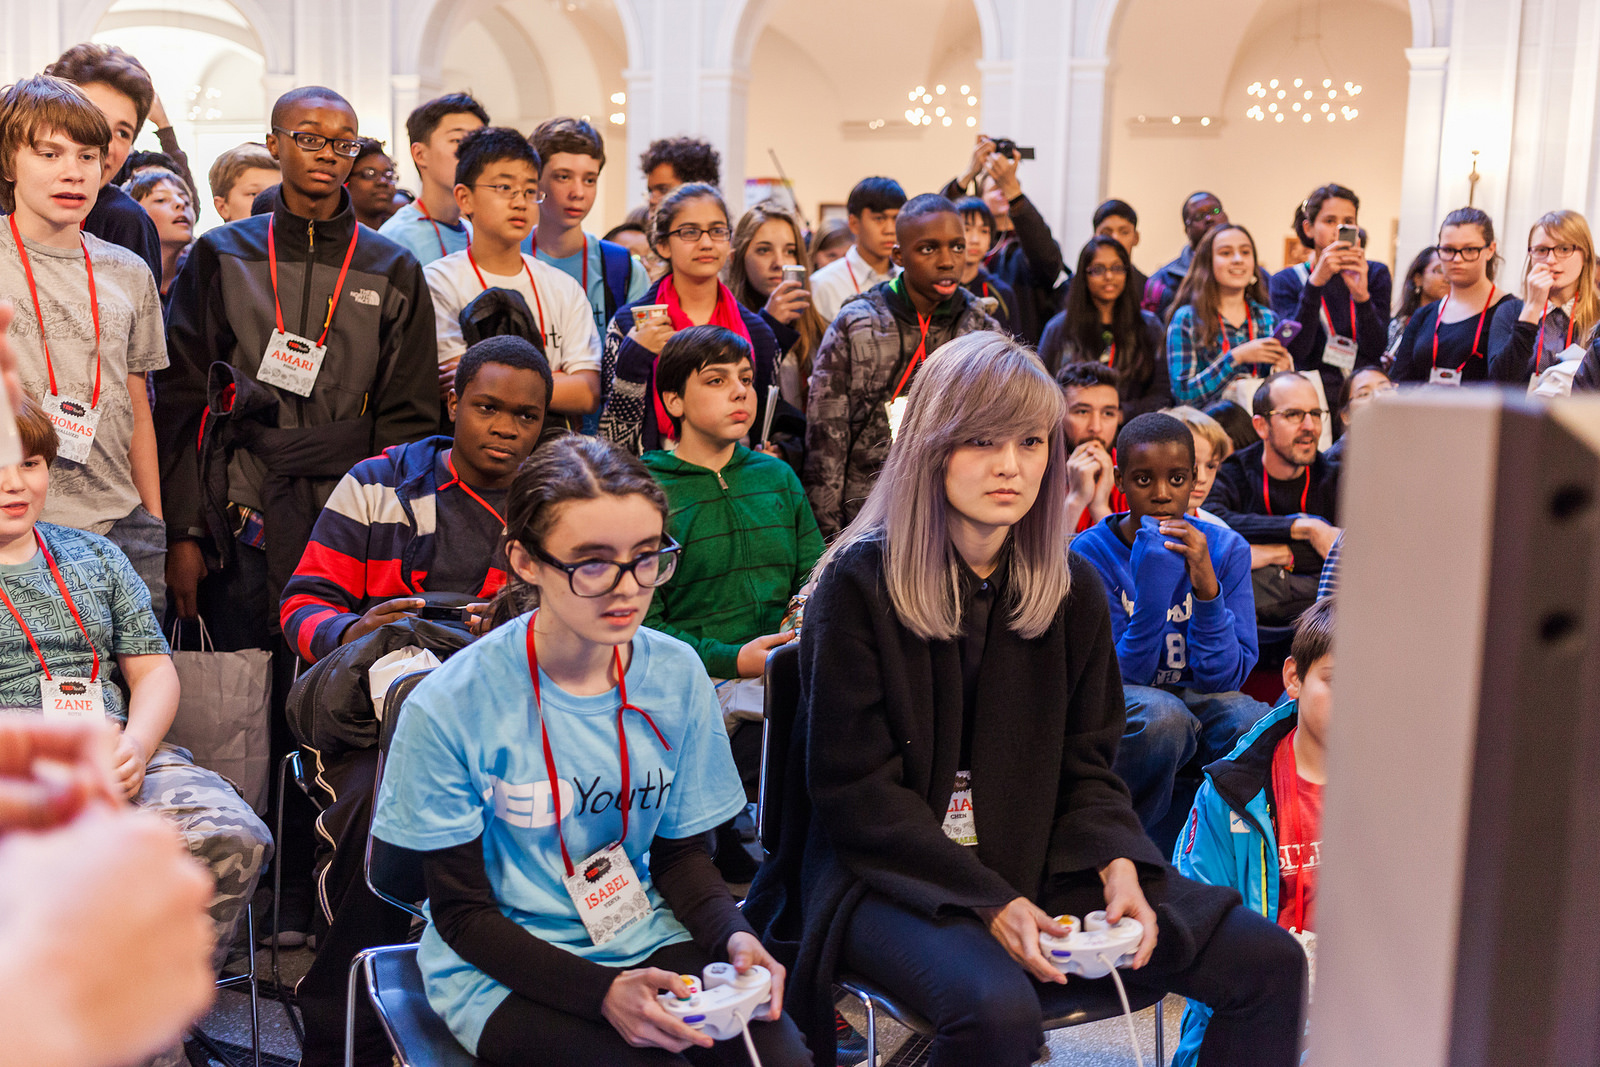 Attendees also got to test their video game skills in a tournament with former competitive Super Smash Bros. Melee player, Lilian Chen, who is better known by her gamer name, Milktea. Photo: Ryan Lash/TED